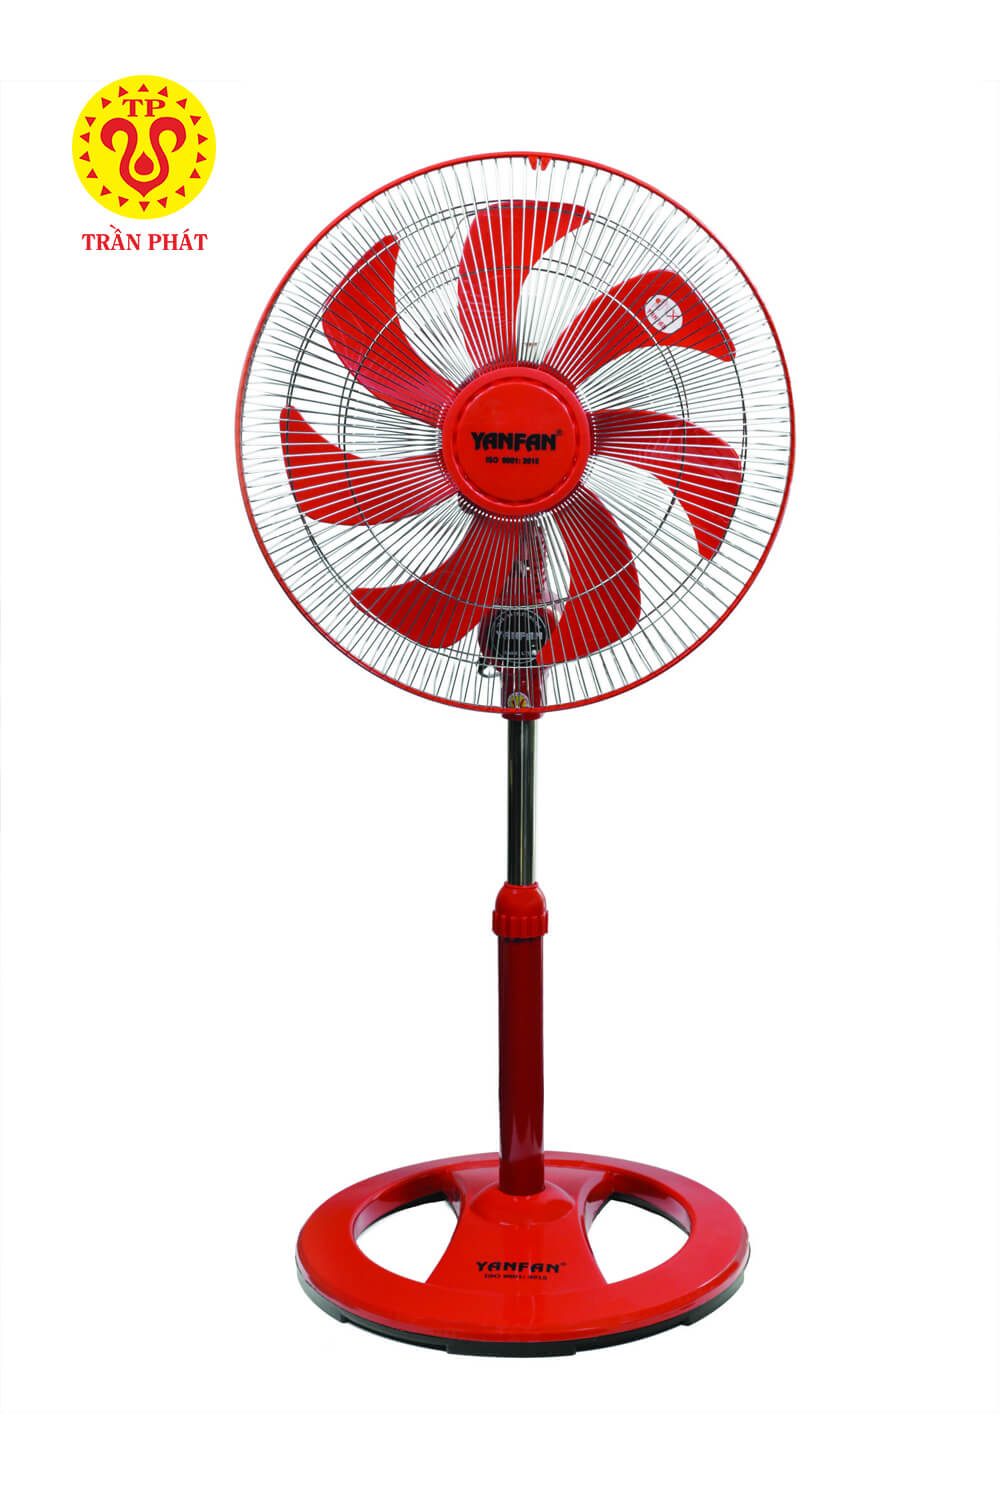 SLIDE FAN AND WHAT YOU NEED TO LEARN ABOUT THIS FAN